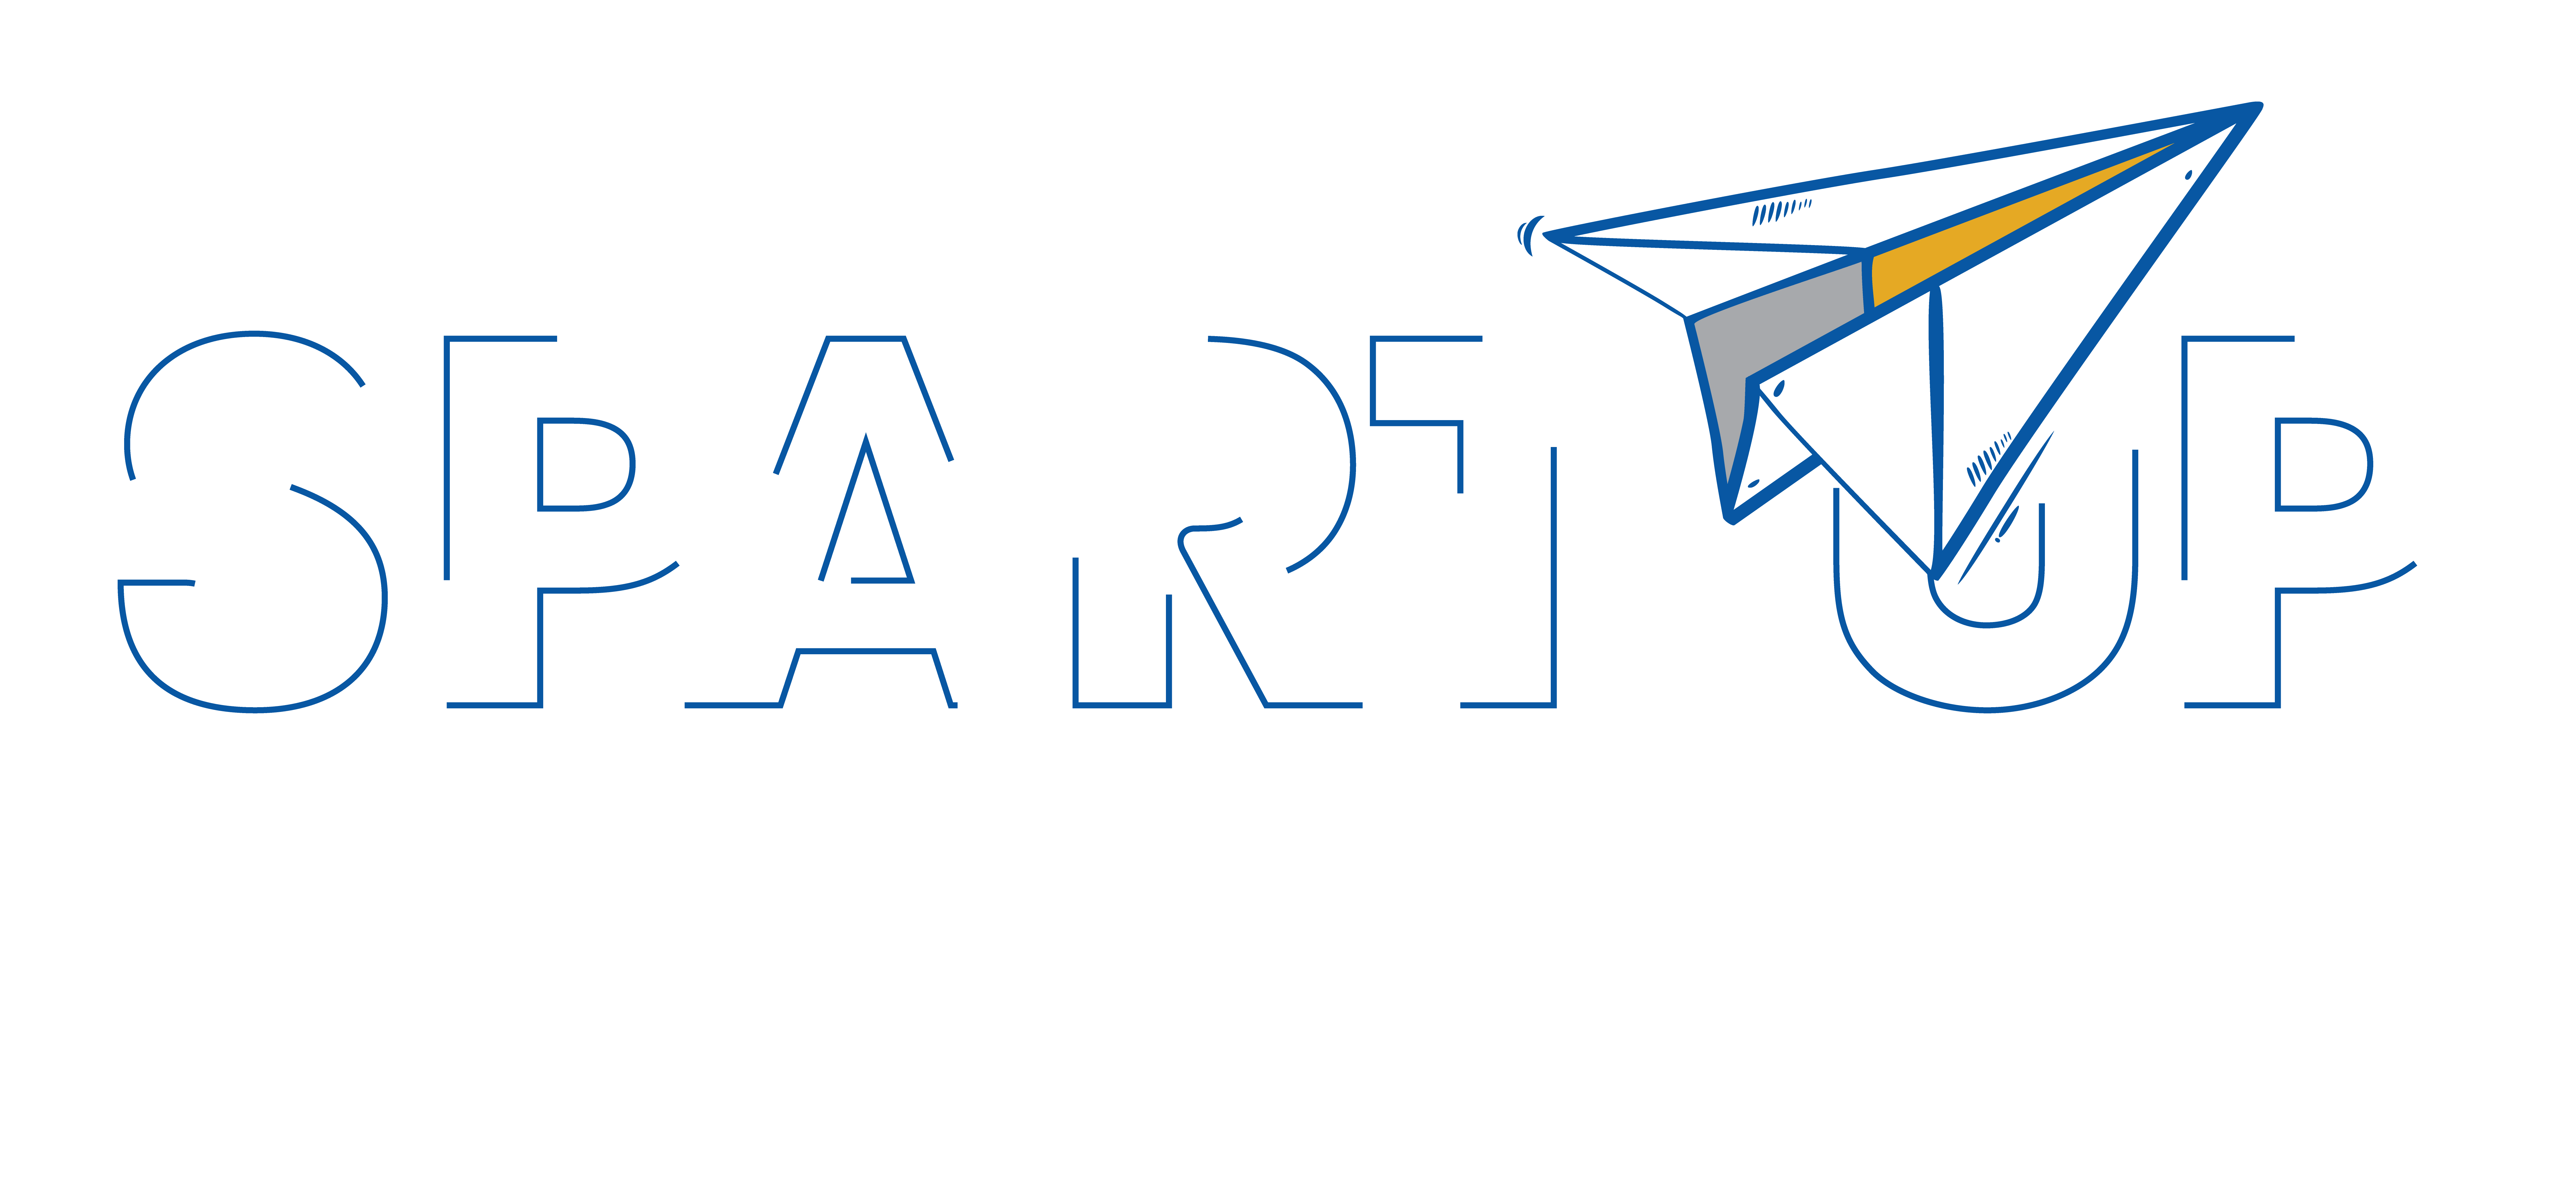 A cartoon style paper plane soars upward between the words "Spart" and "Up," with a dotted line indicating its flight path.a dot